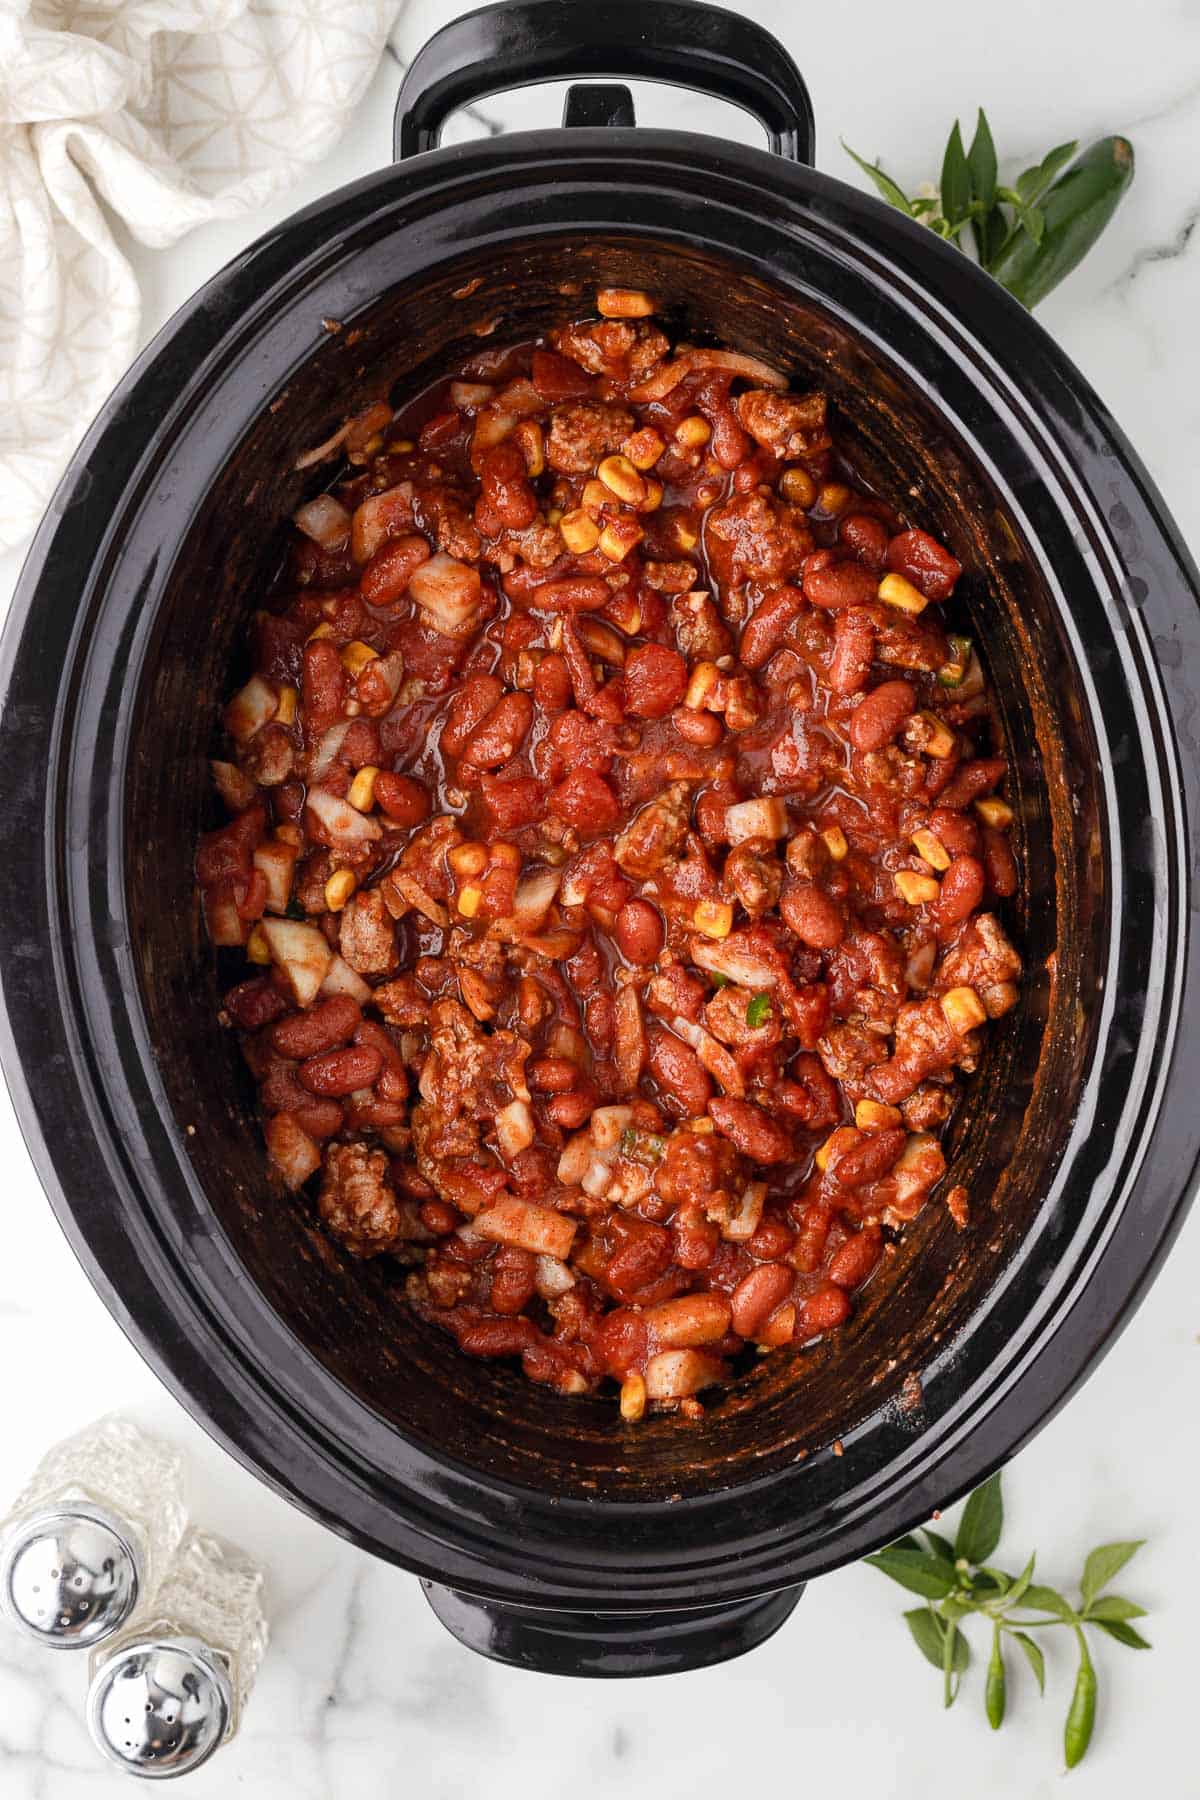 A slow cooker loaded up with ground turkey, beans, corn, onion, garlic, jalapeños, tomatoes and warm spices to make homemade chili